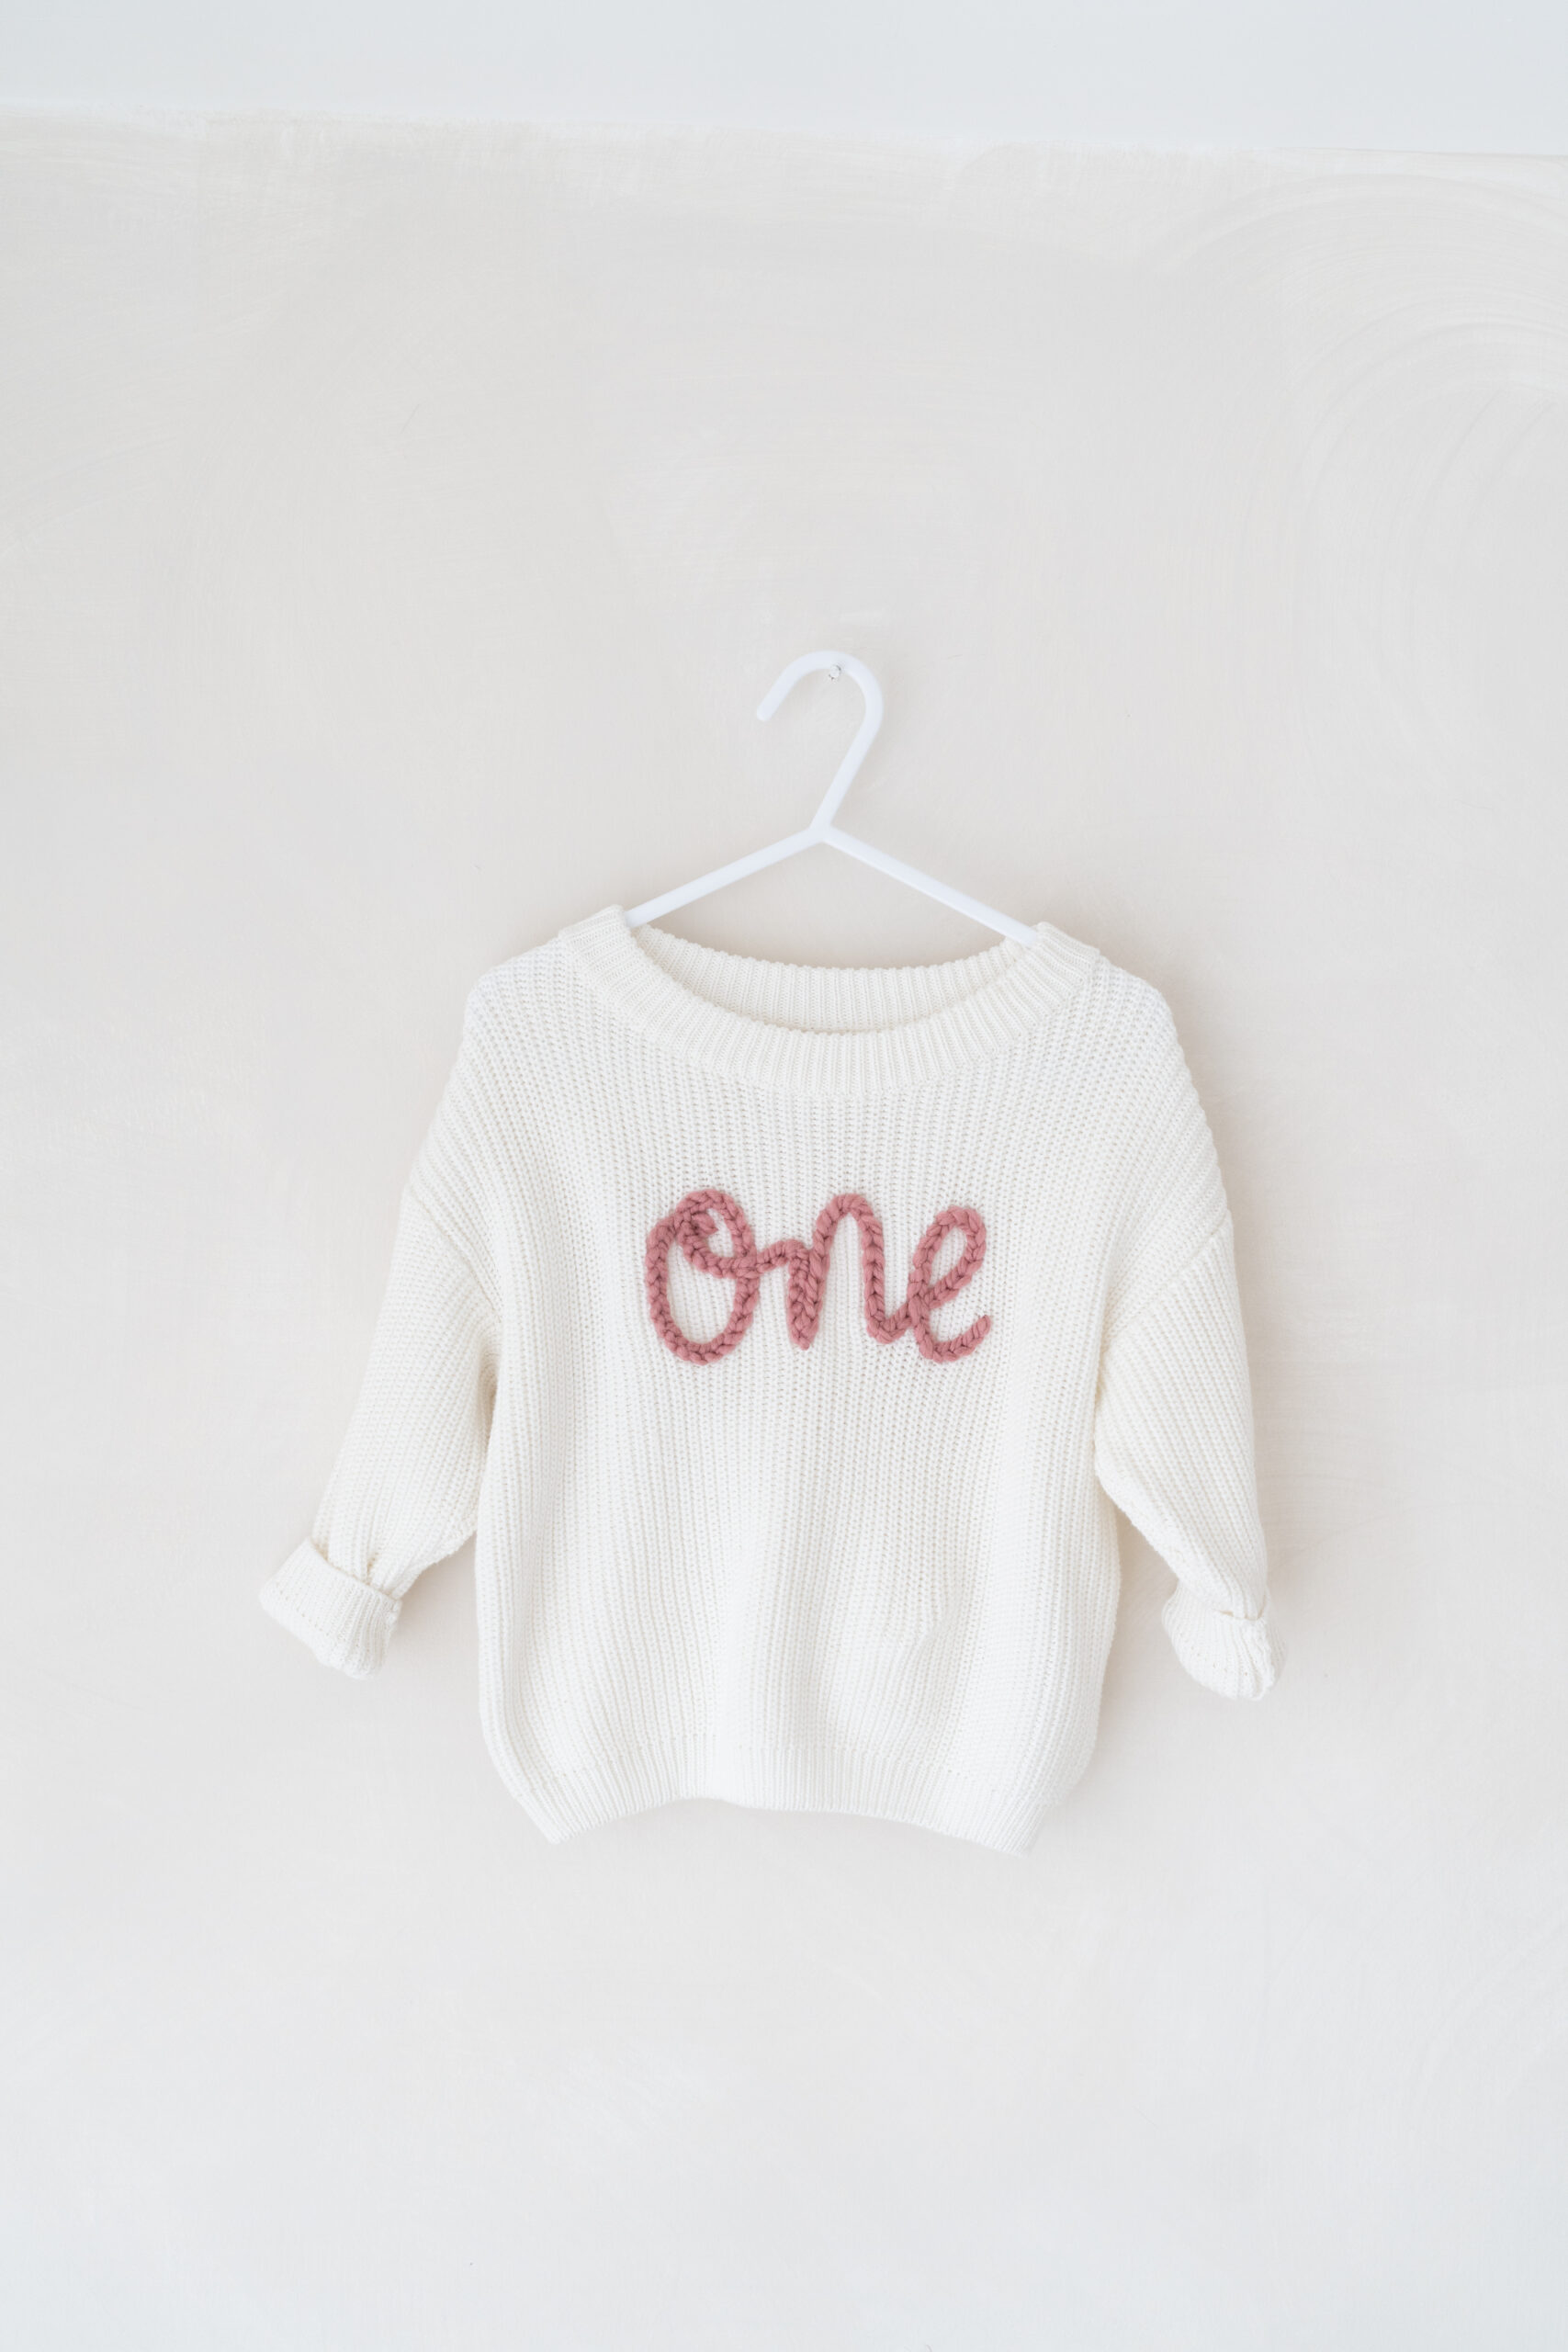 Over-sized one jumper part of the studio wardrobe for first birthday photoshoots.